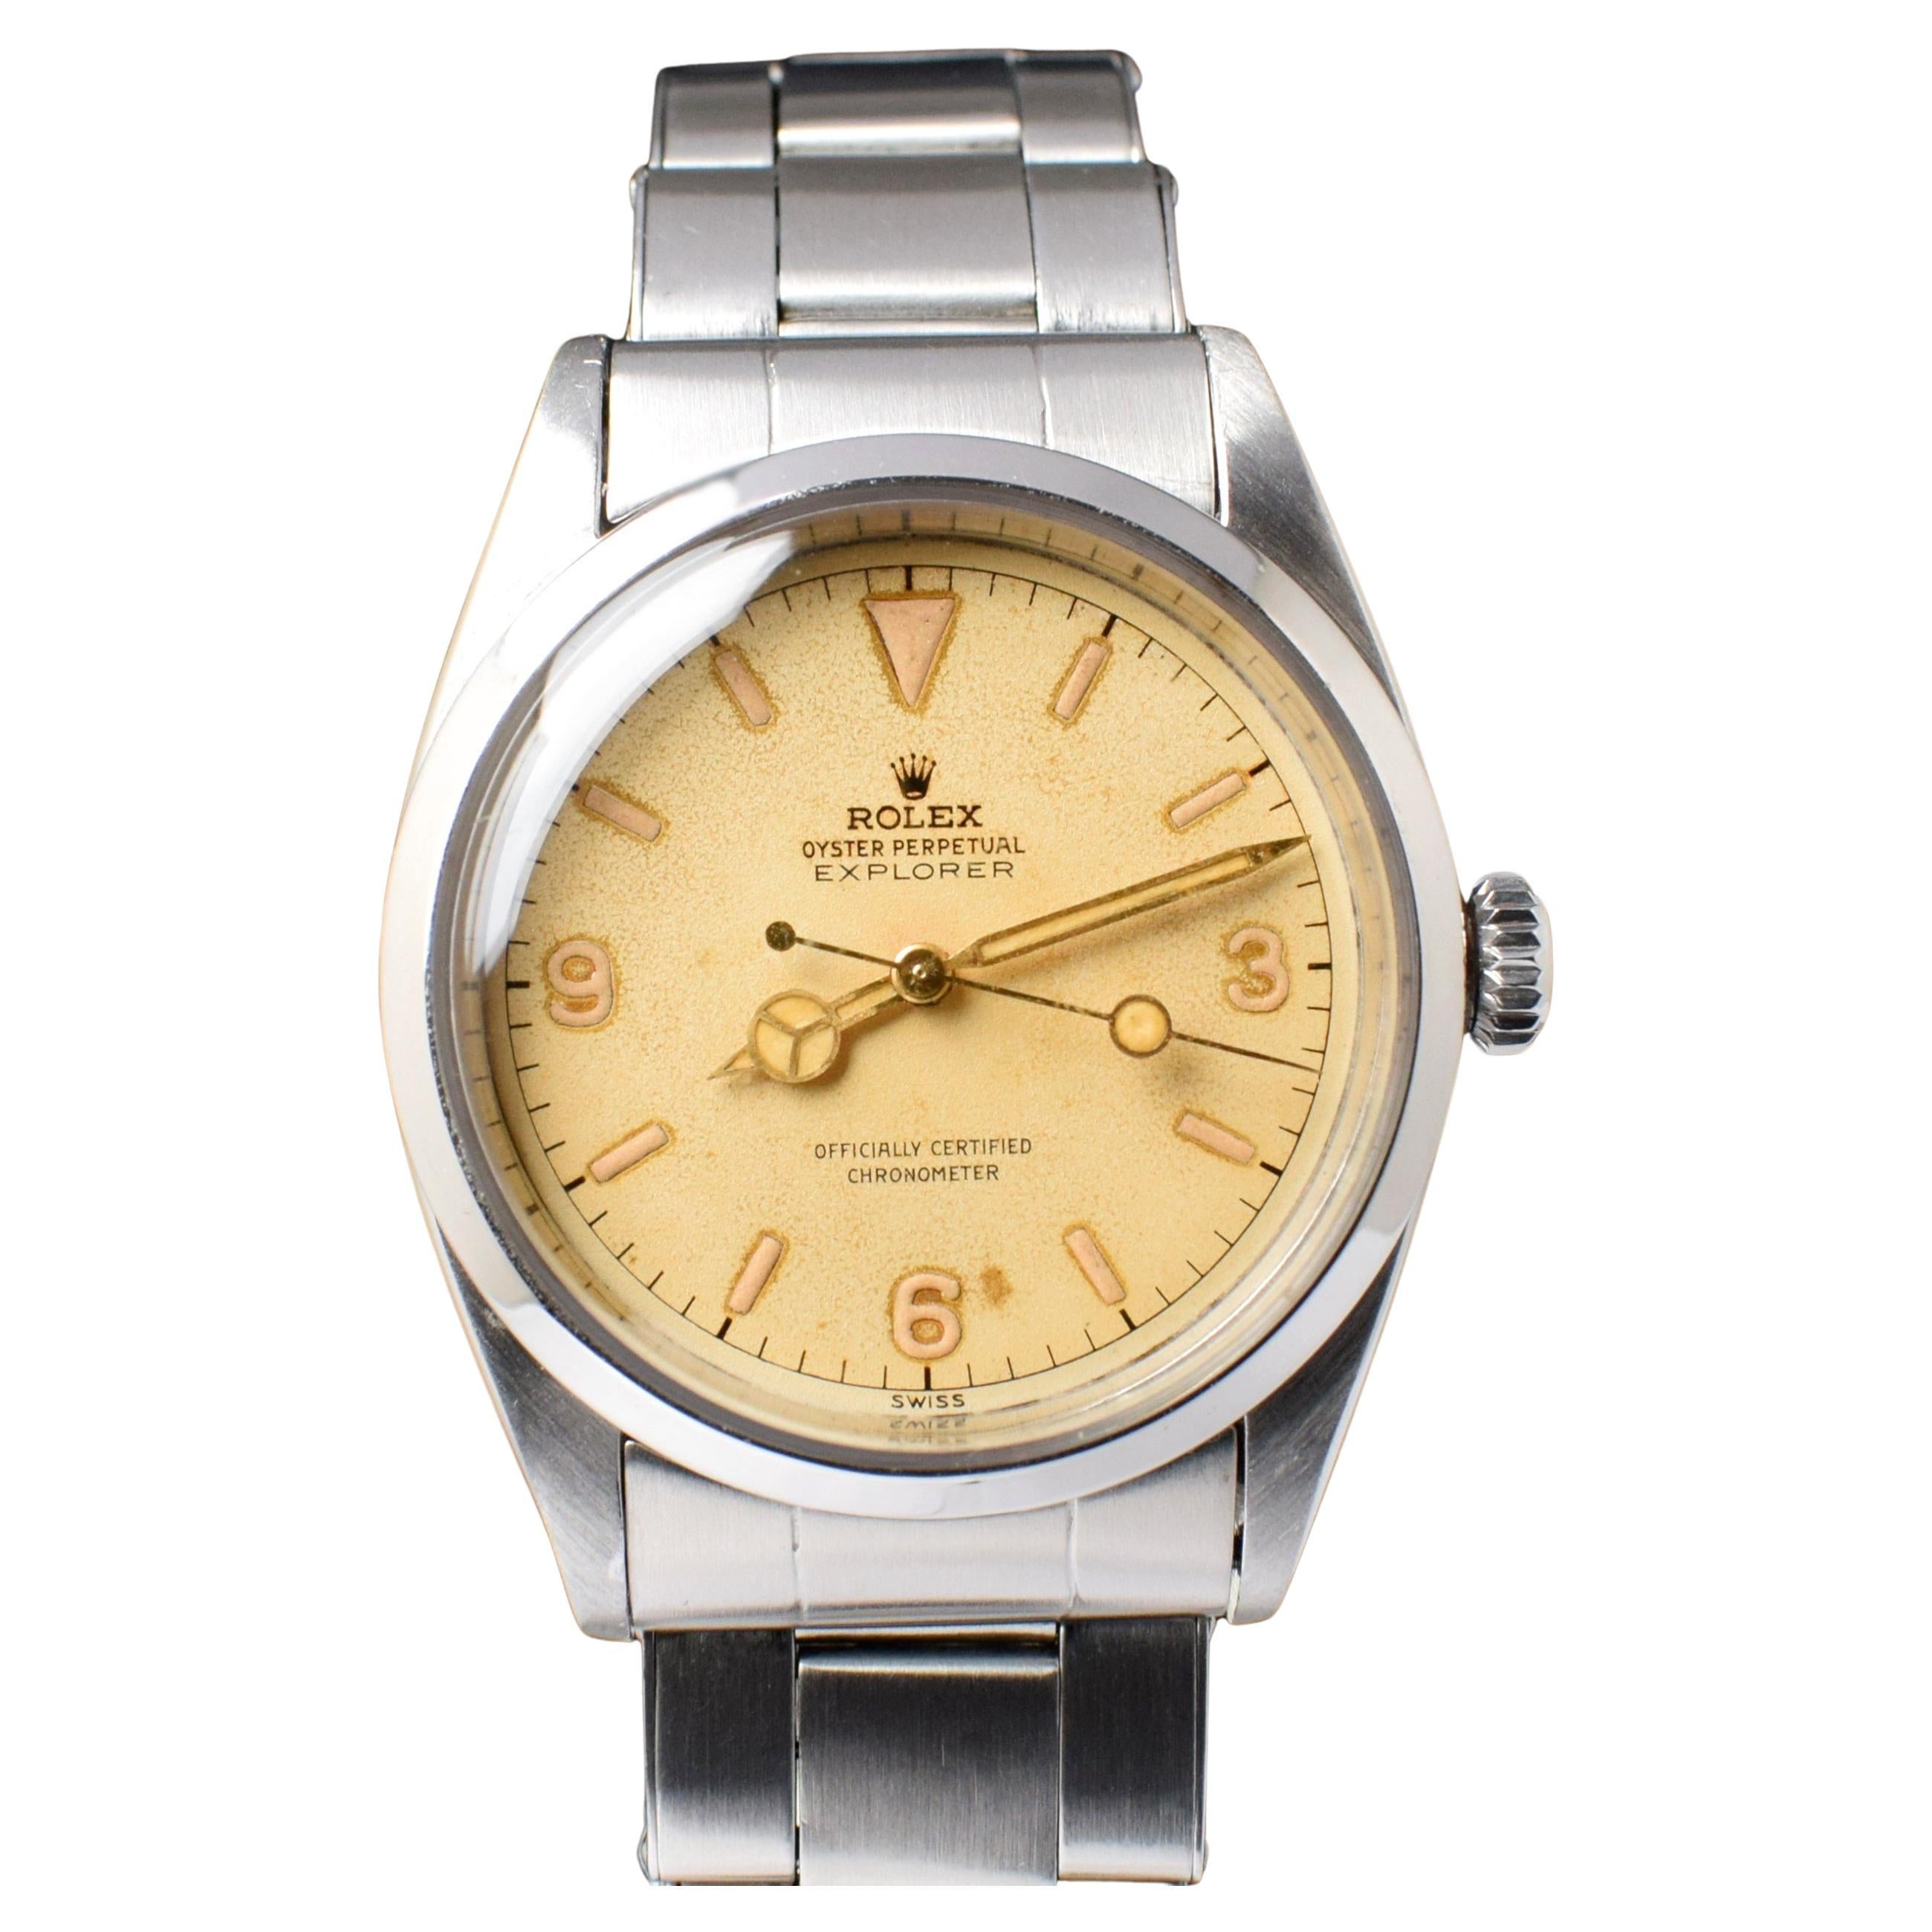 Rolex Explorer Albino off White Ivory Creamy 6610 Steel Automatic Watch, 1956 For Sale